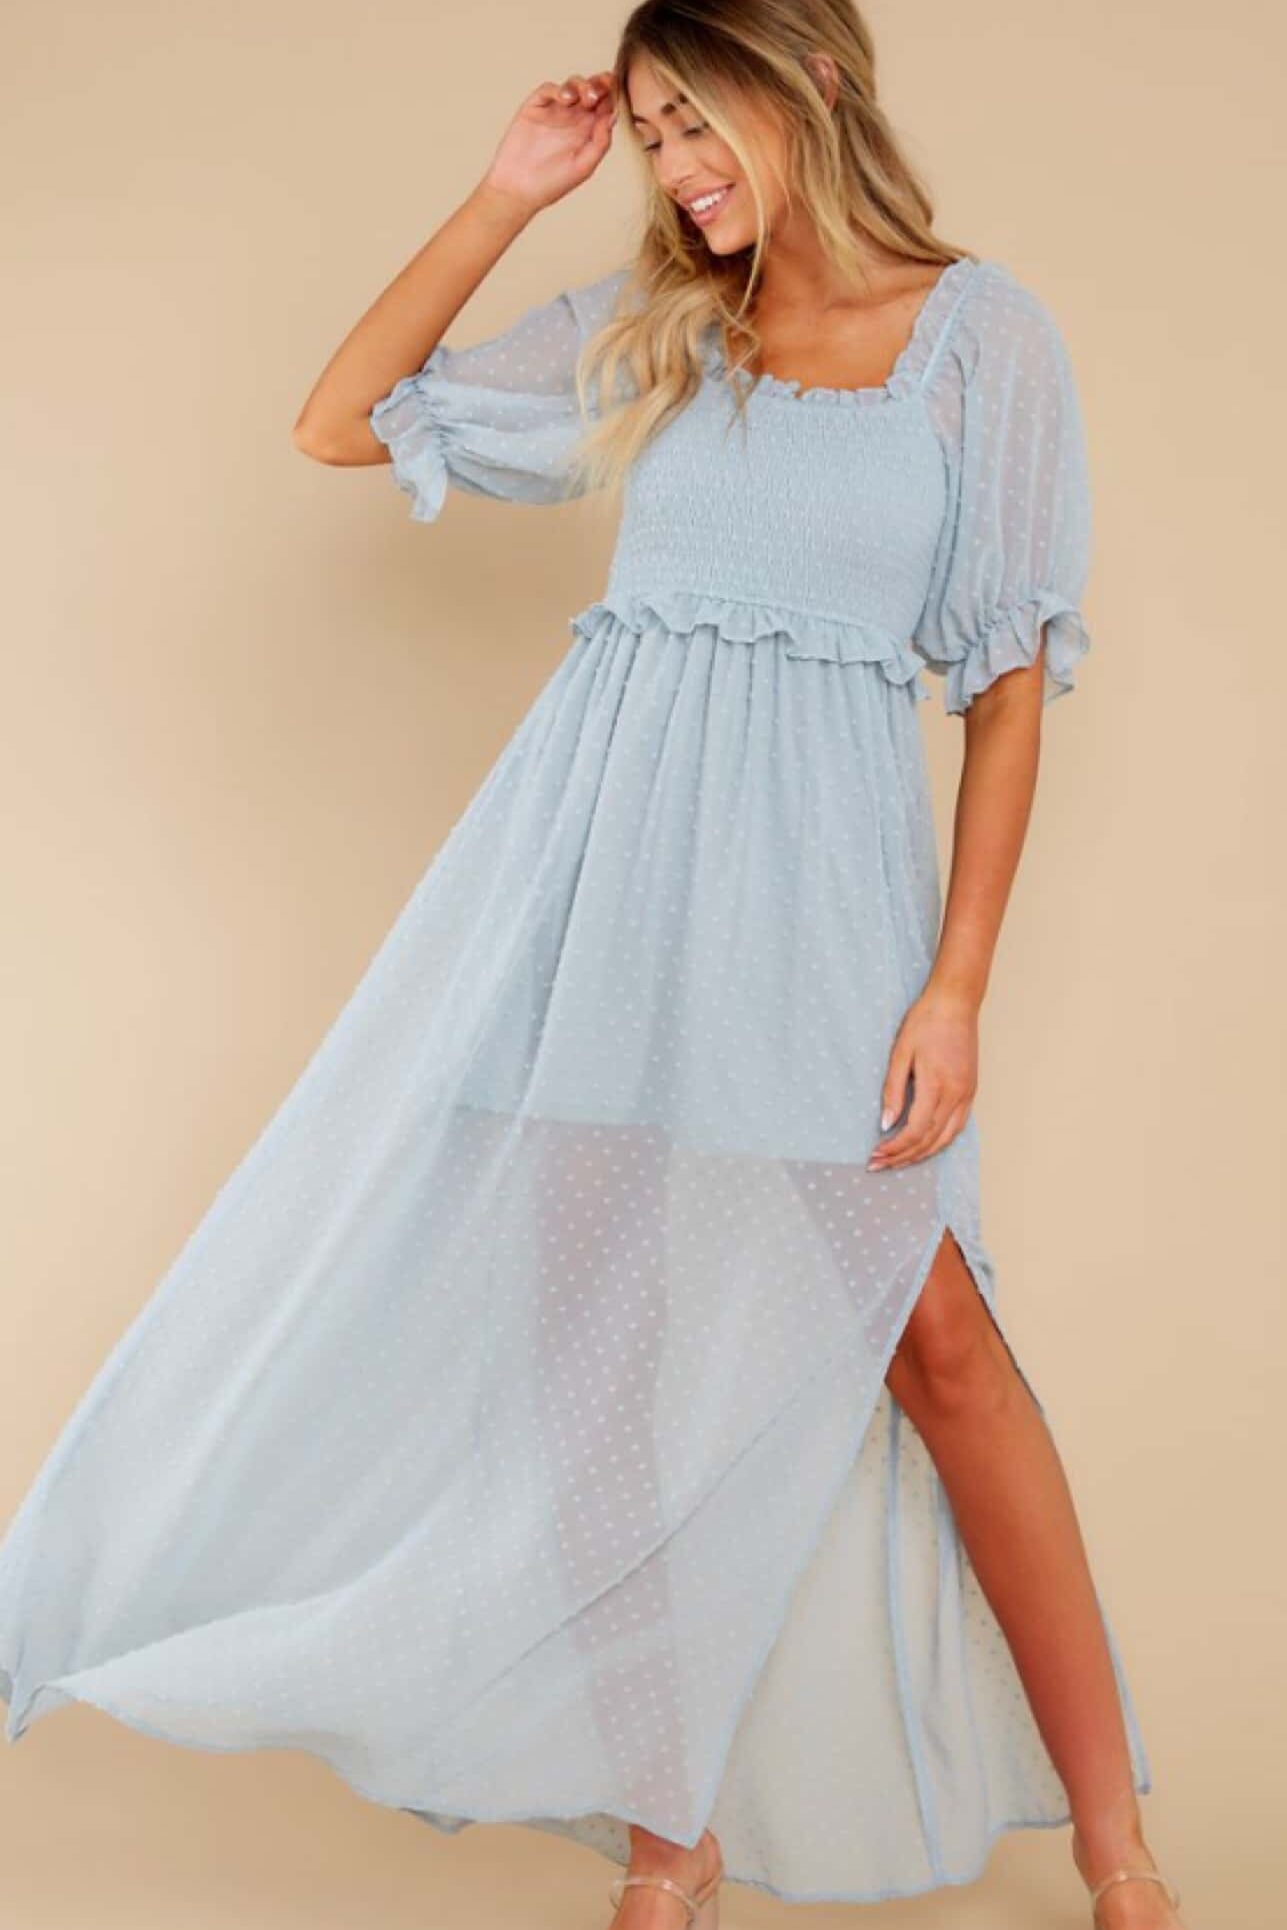 20 Best Baby Blue Dresses & Tips on How to Style Them